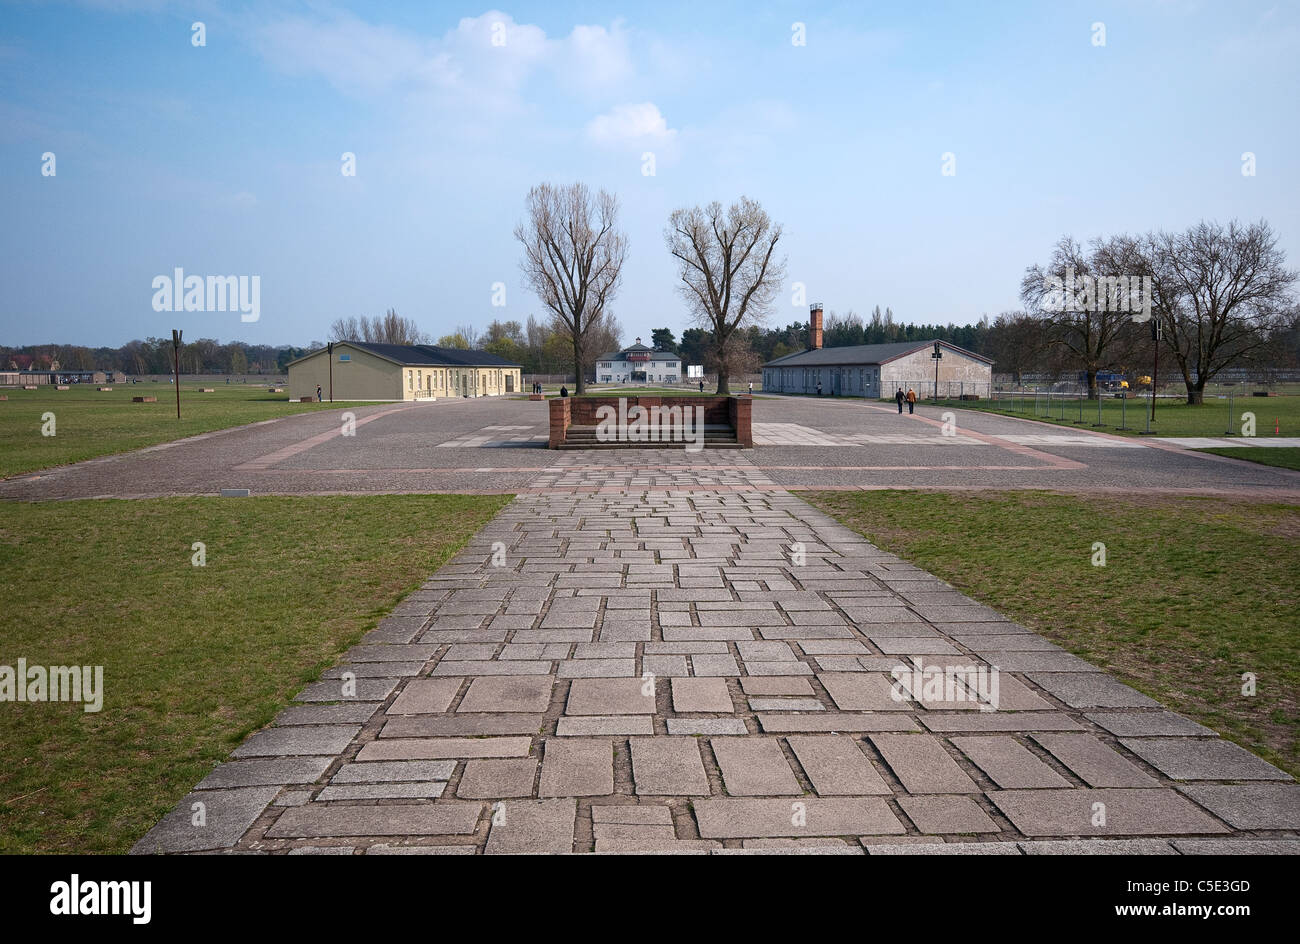 Sachsenhausen concentration camp Museum located 35km North of Berlin, Germany Stock Photo